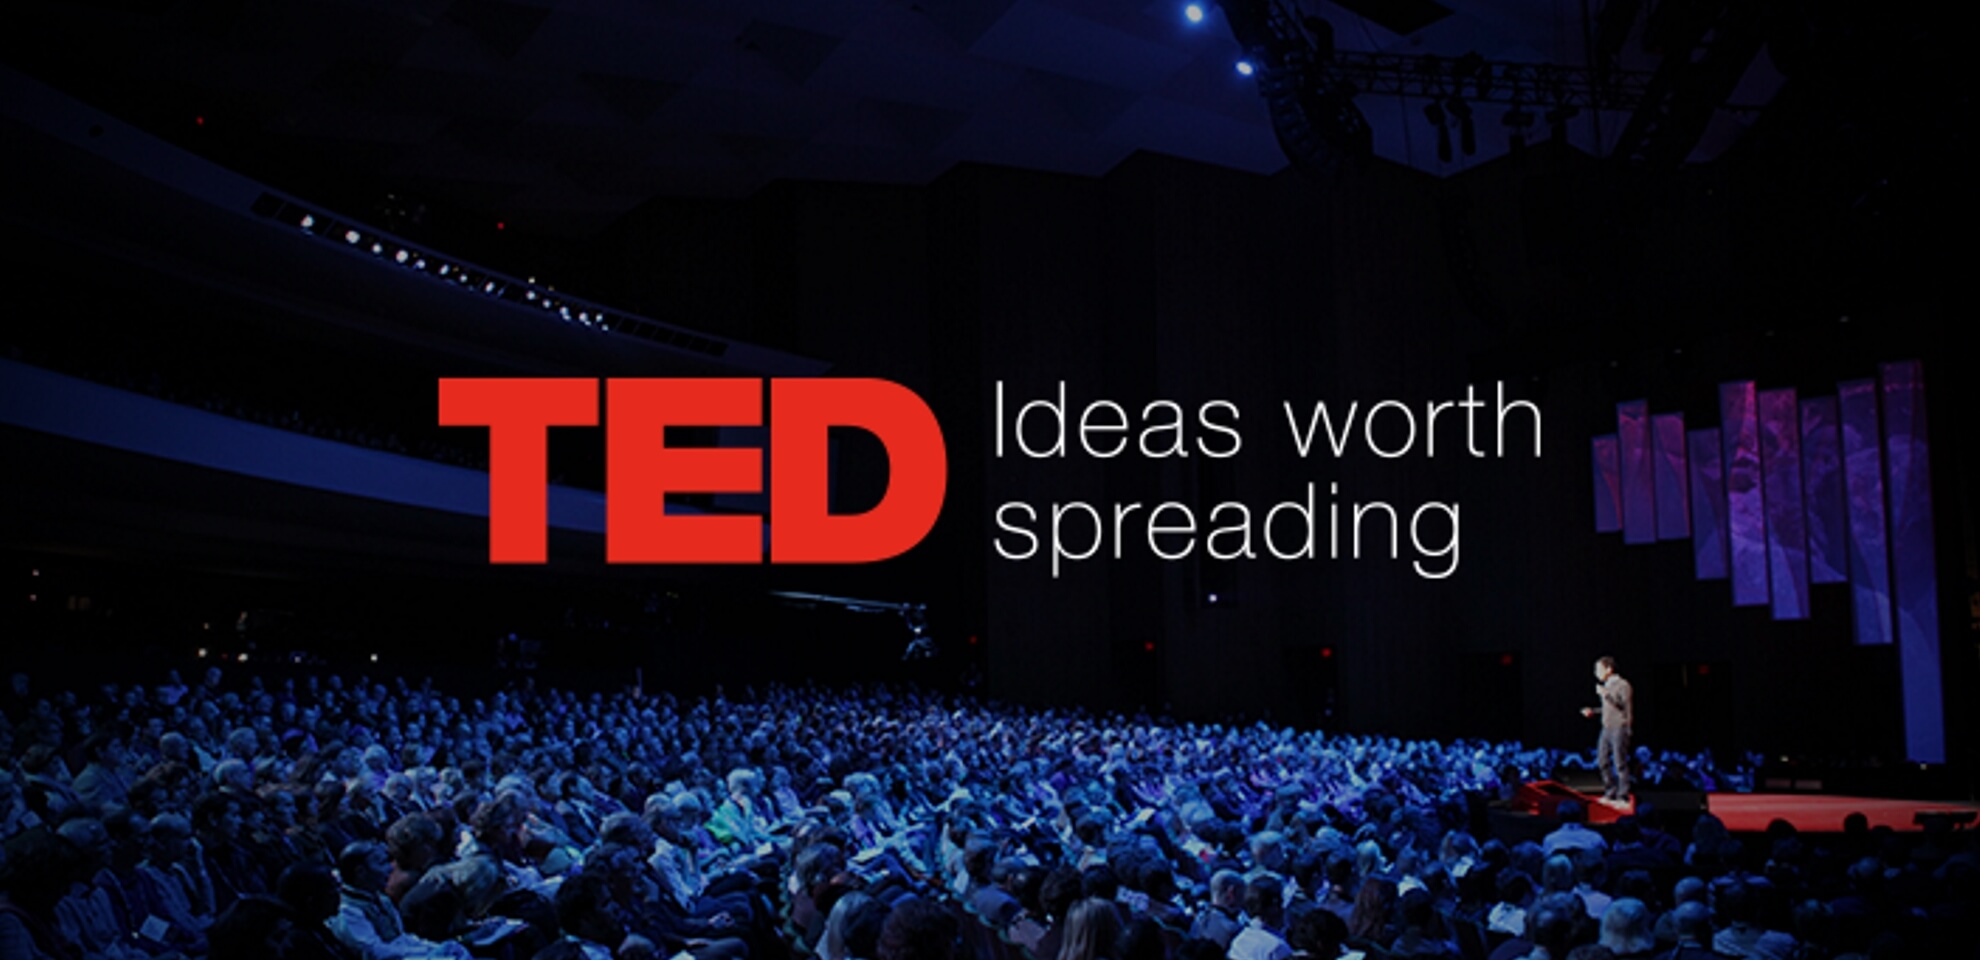 TED Talk on the big screen